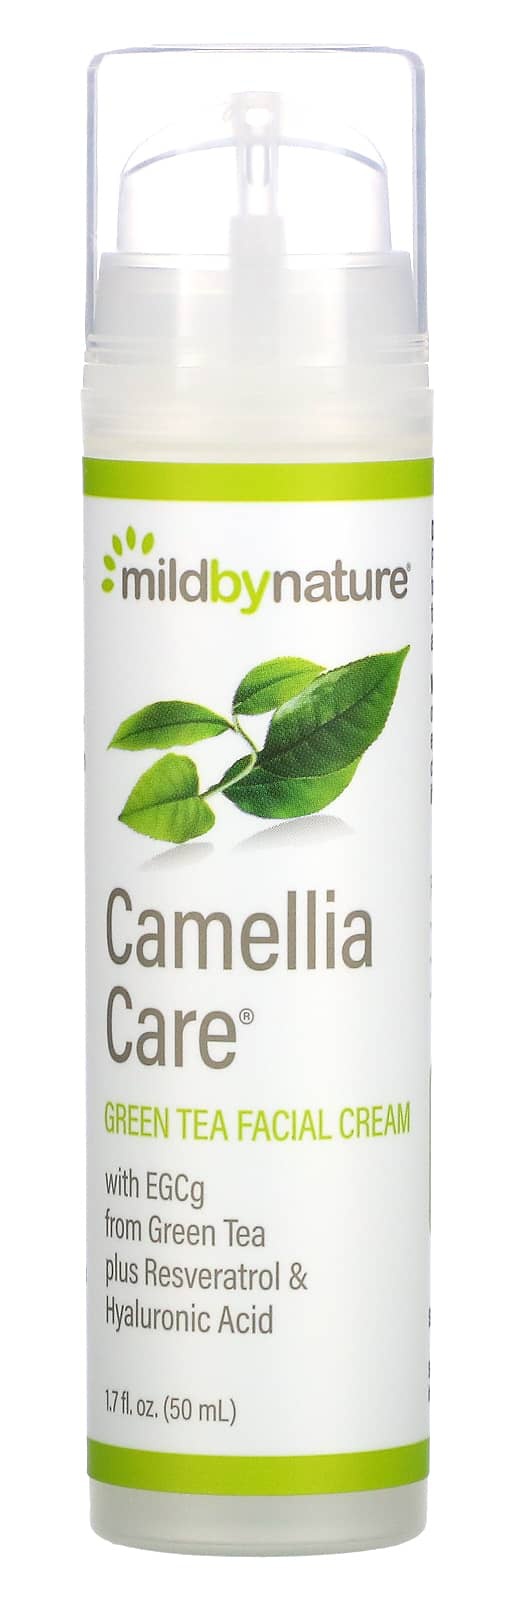 Mild By Nature Camellia Care